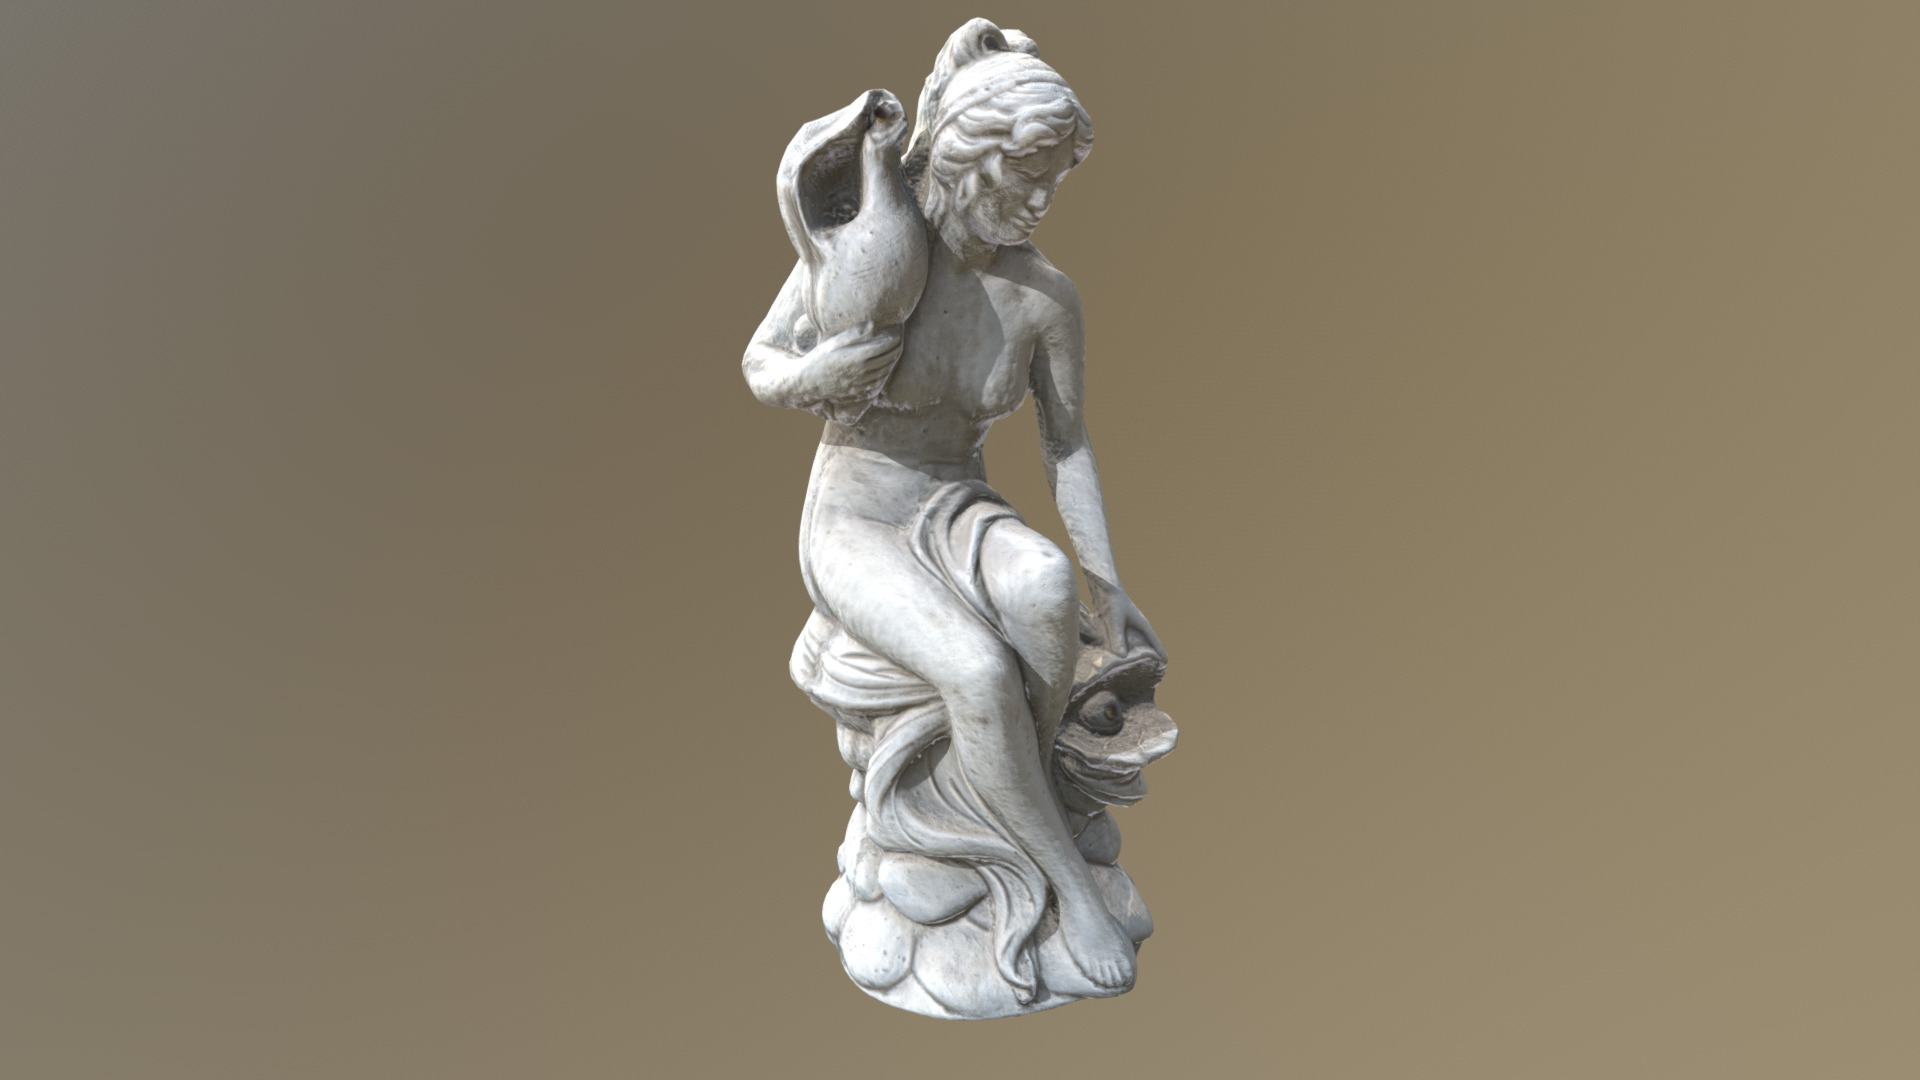 3D model Statue02 - This is a 3D model of the Statue02. The 3D model is about a statue of a person riding a horse.